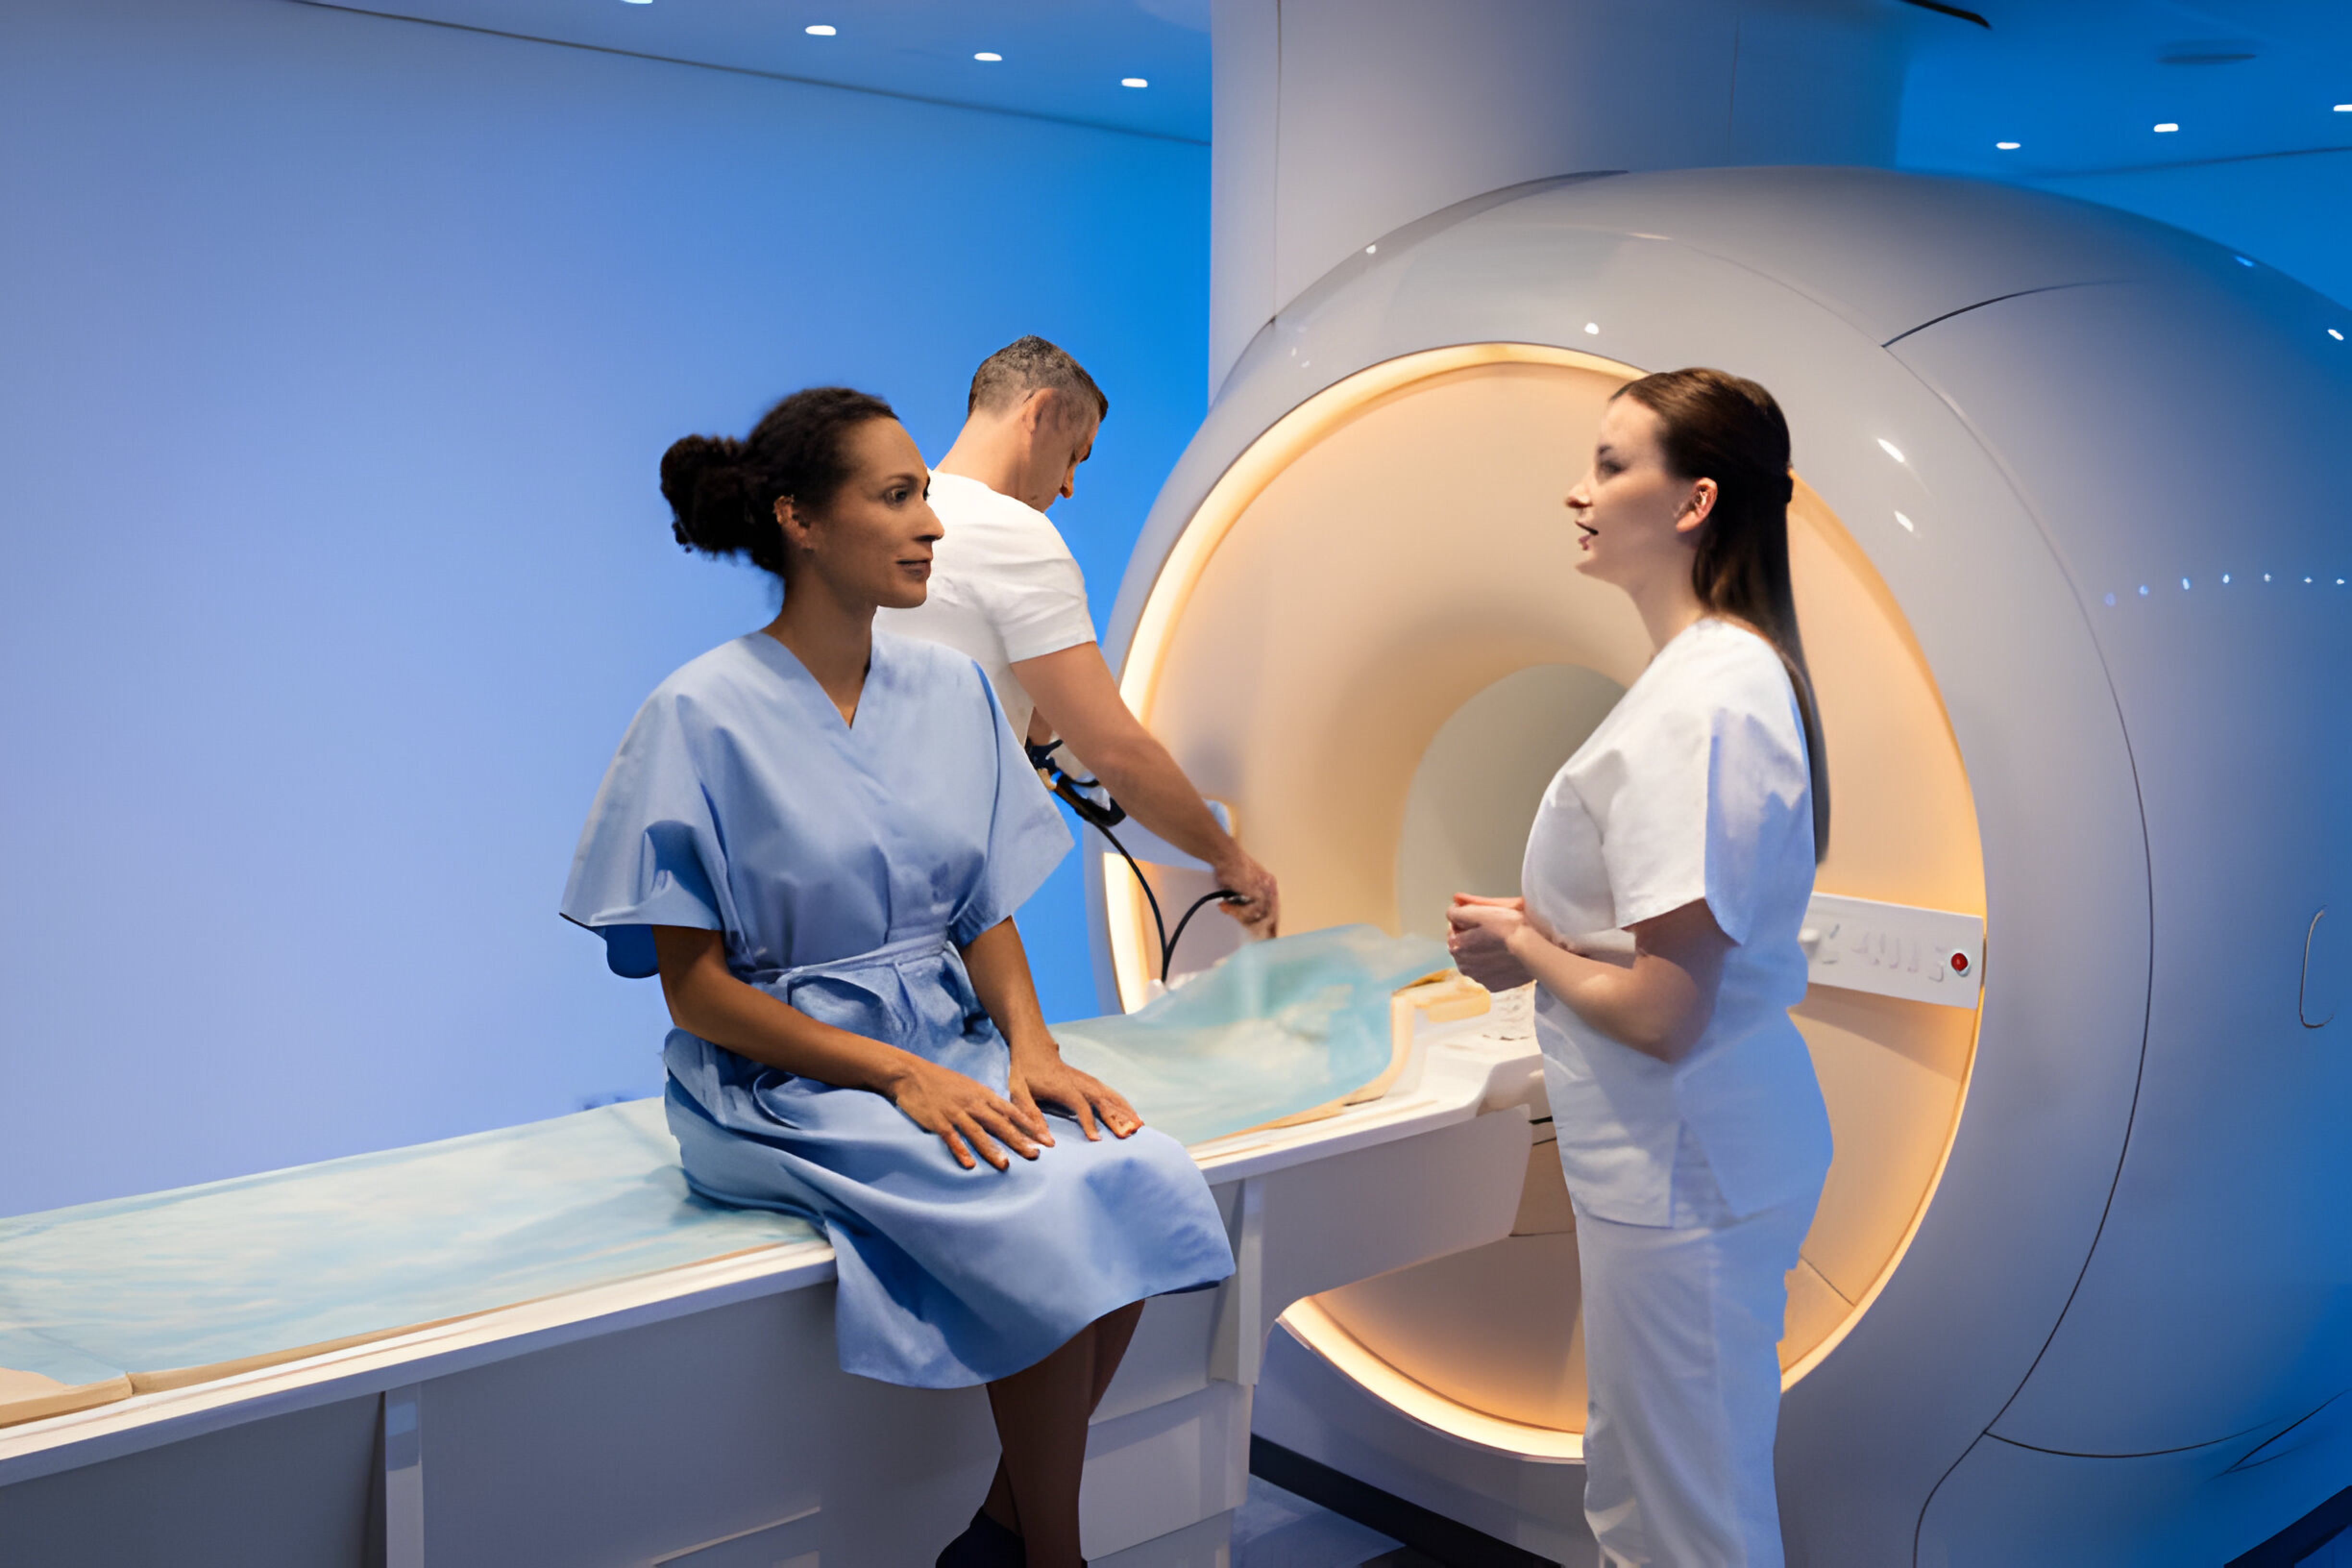 Prepping for Your MRI: What You Need to Know